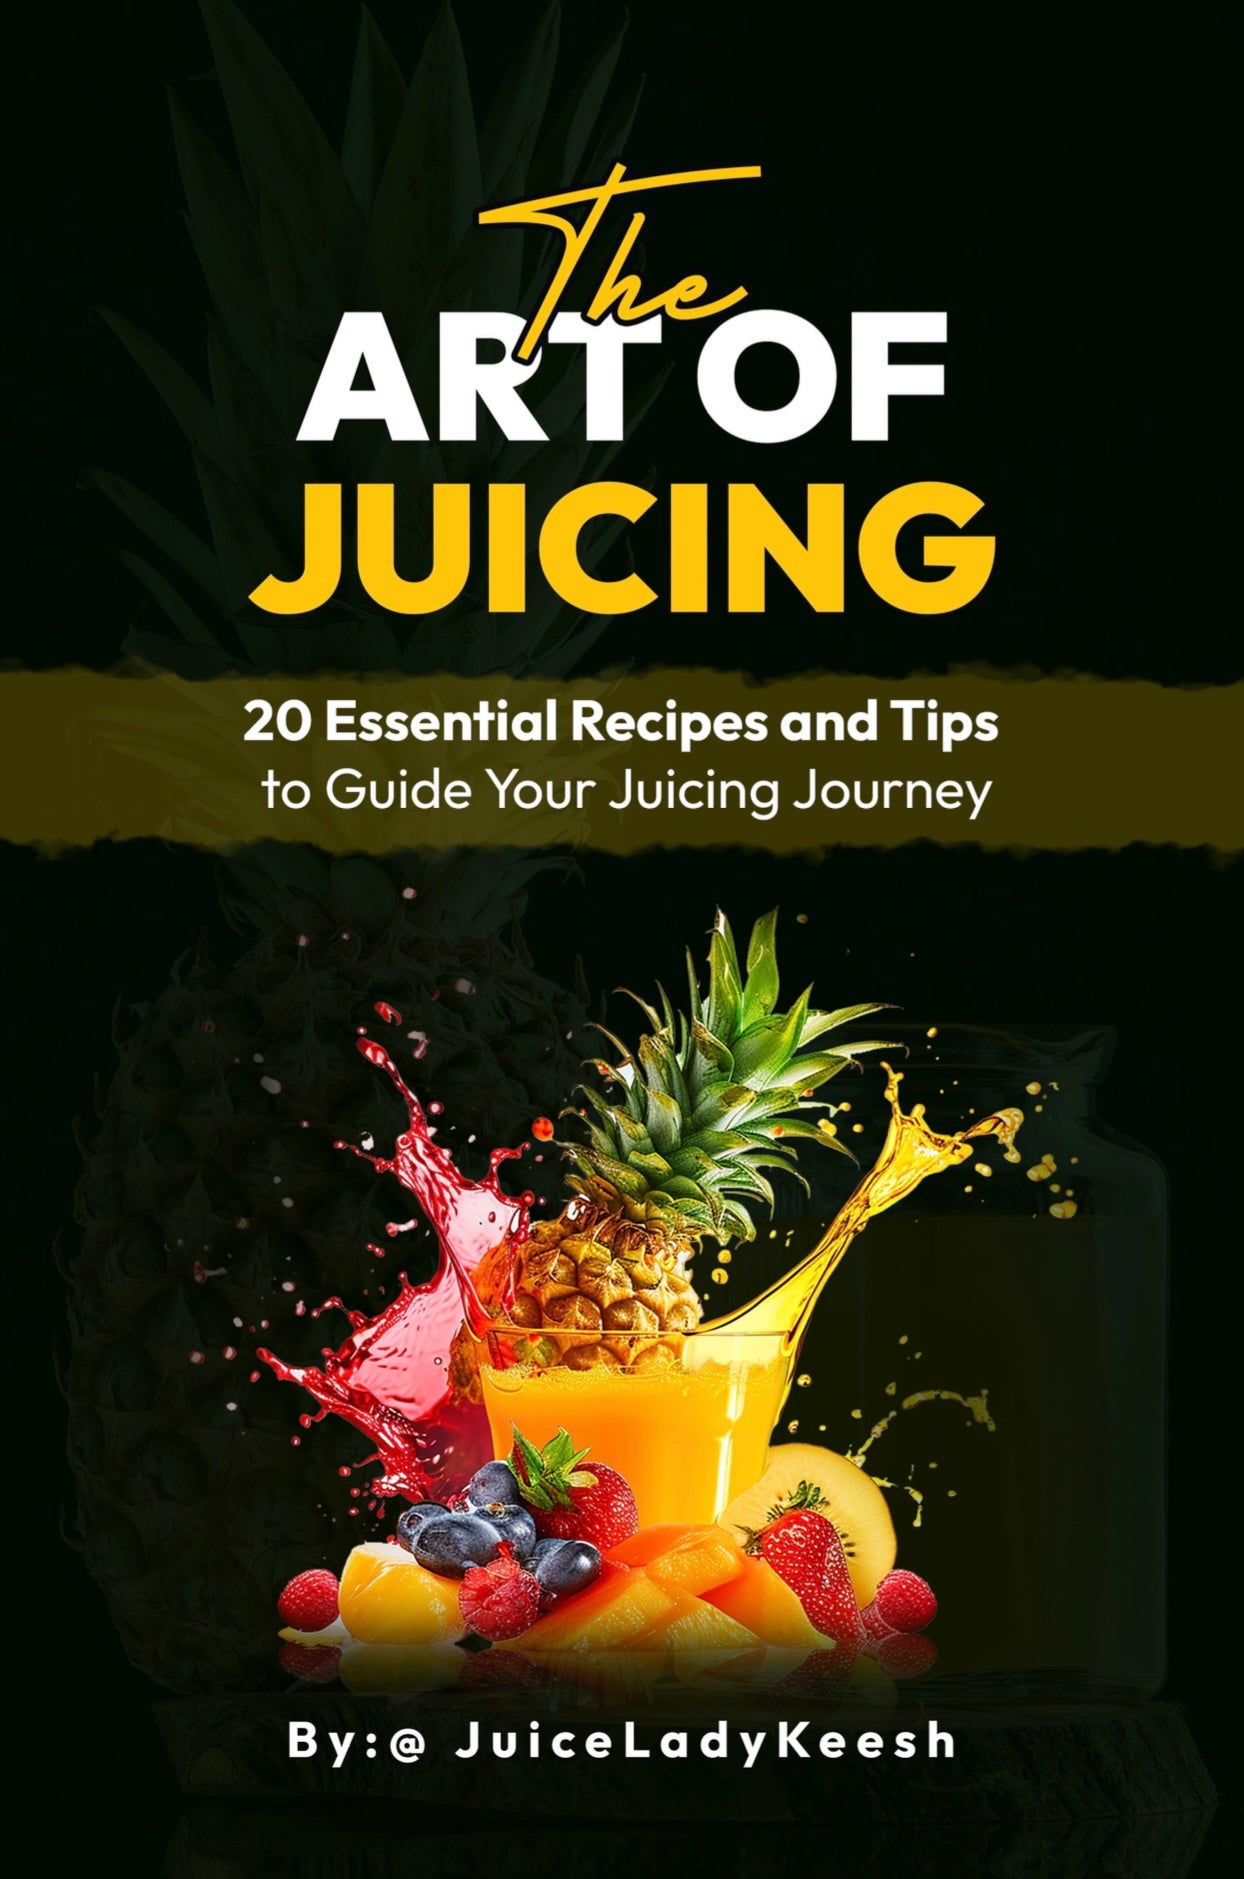 The Art of Juicing:20 Essential Recipes and Tips to Start Your Juicing Journey